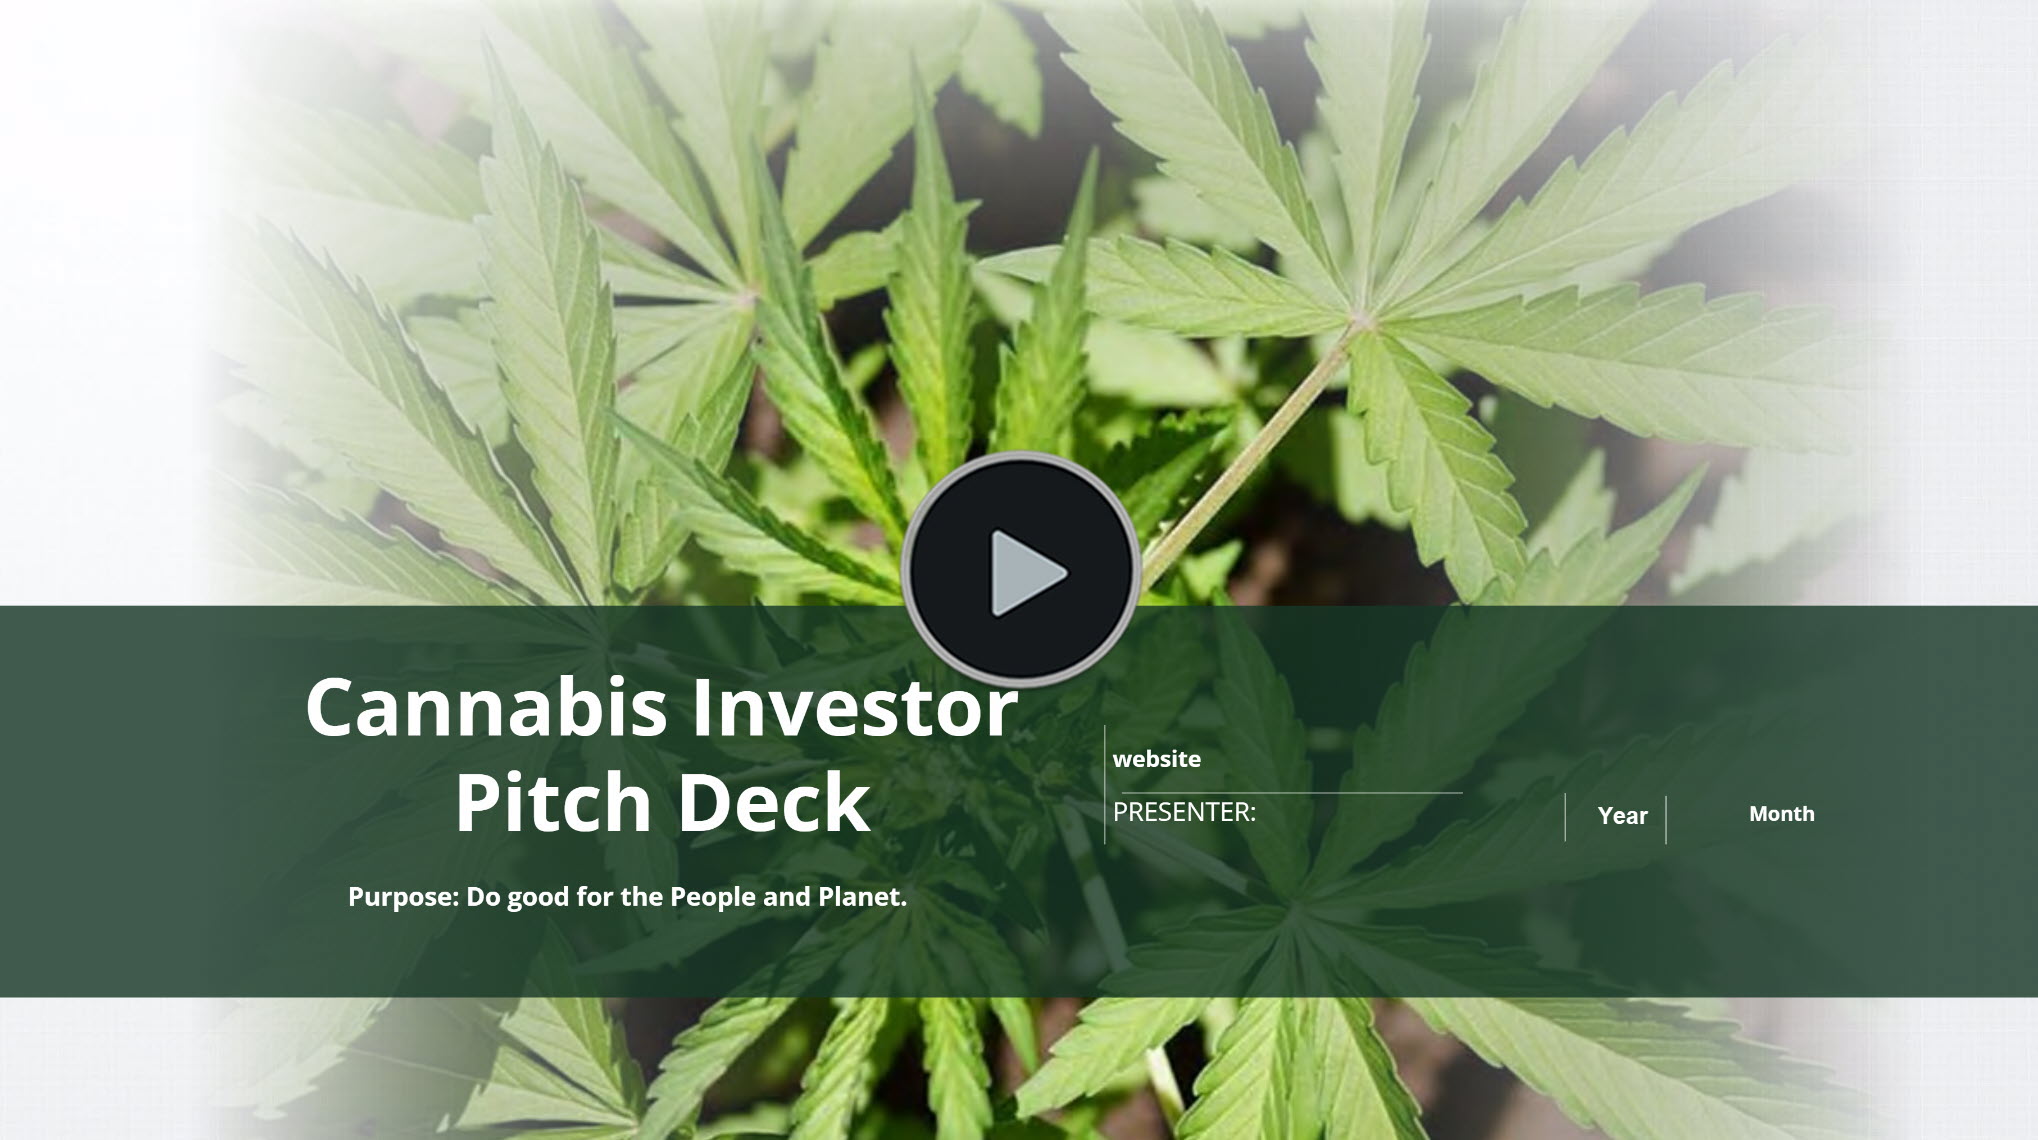 Cannabis Micro Cultivation Investor Pitch Deck Template